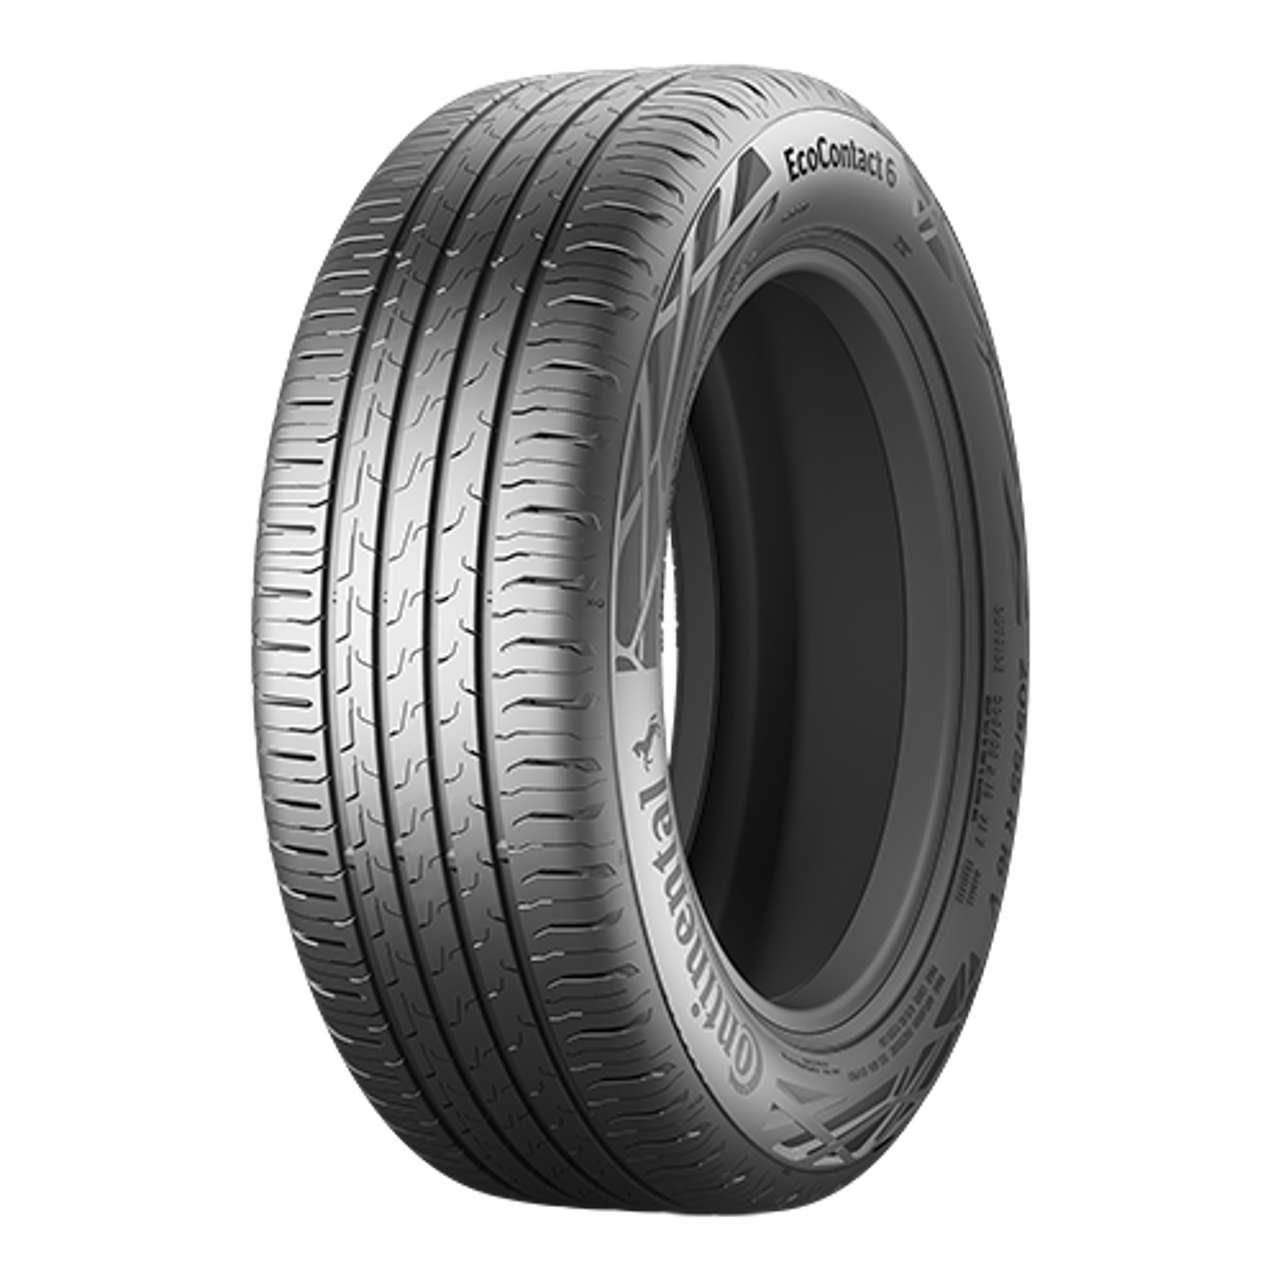 CONTINENTAL ECOCONTACT 6Q (*) (MO) 275/40R19 105Y FR BSW